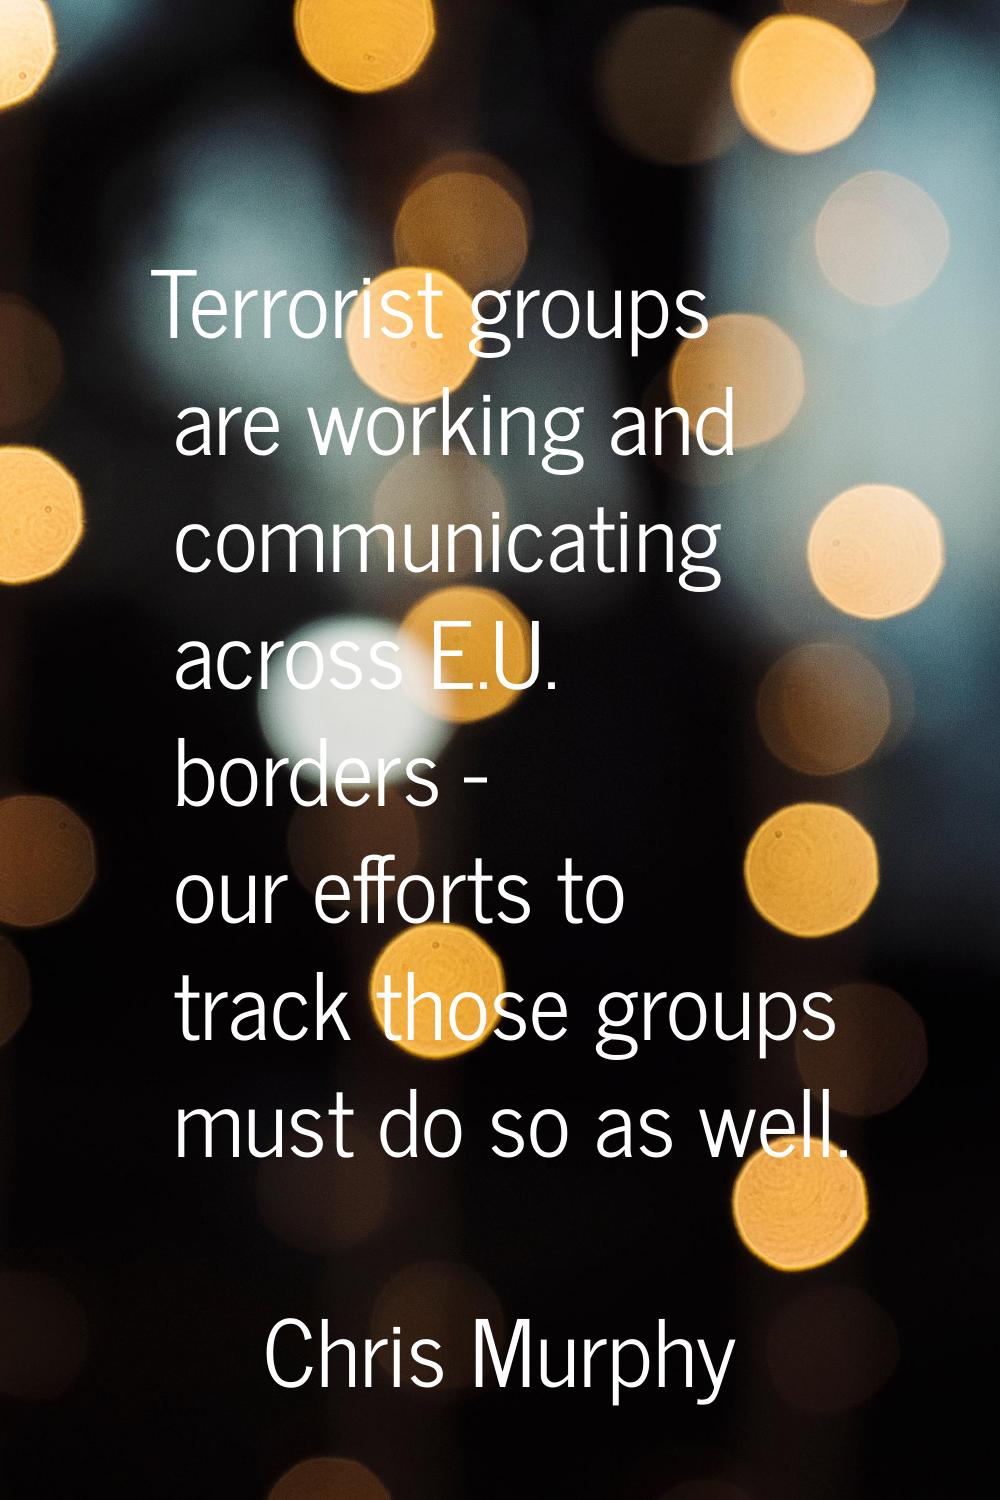 Terrorist groups are working and communicating across E.U. borders - our efforts to track those gro